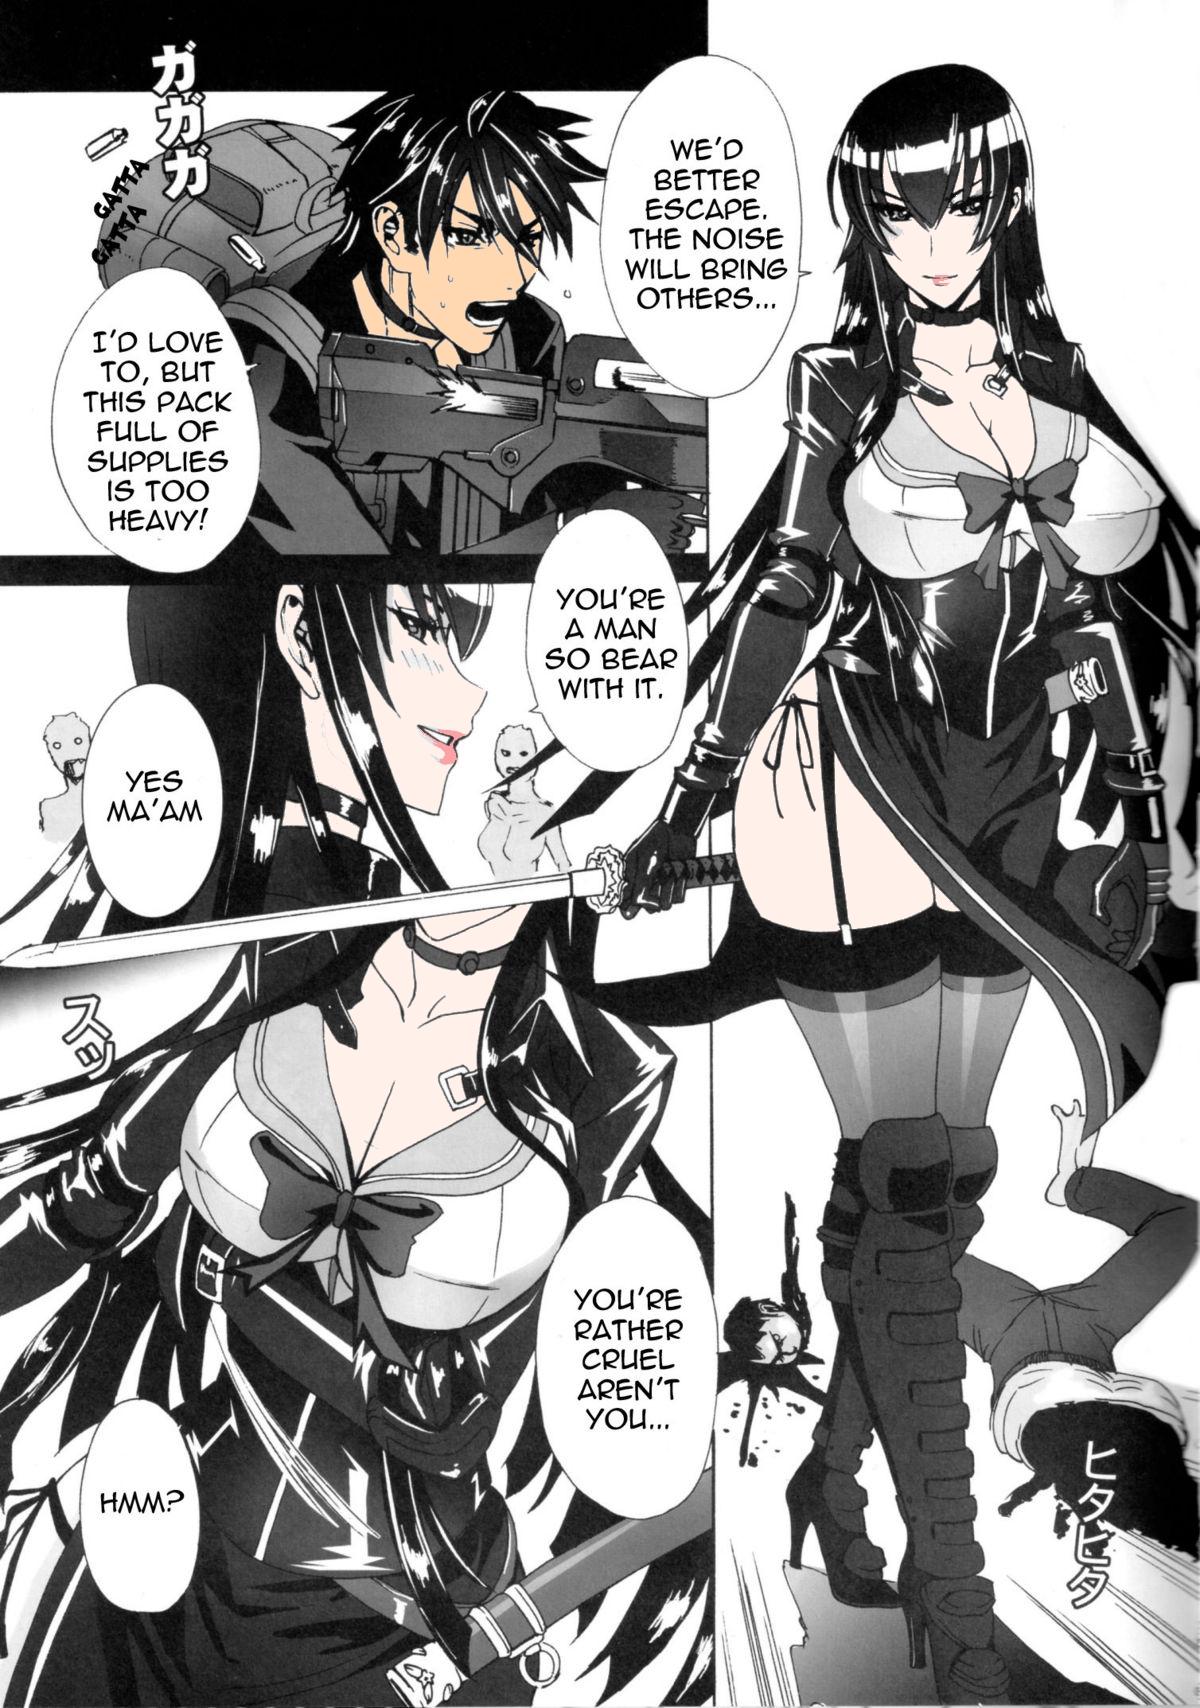 Blow Kiss of the Dead - Highschool of the dead Femboy - Page 4